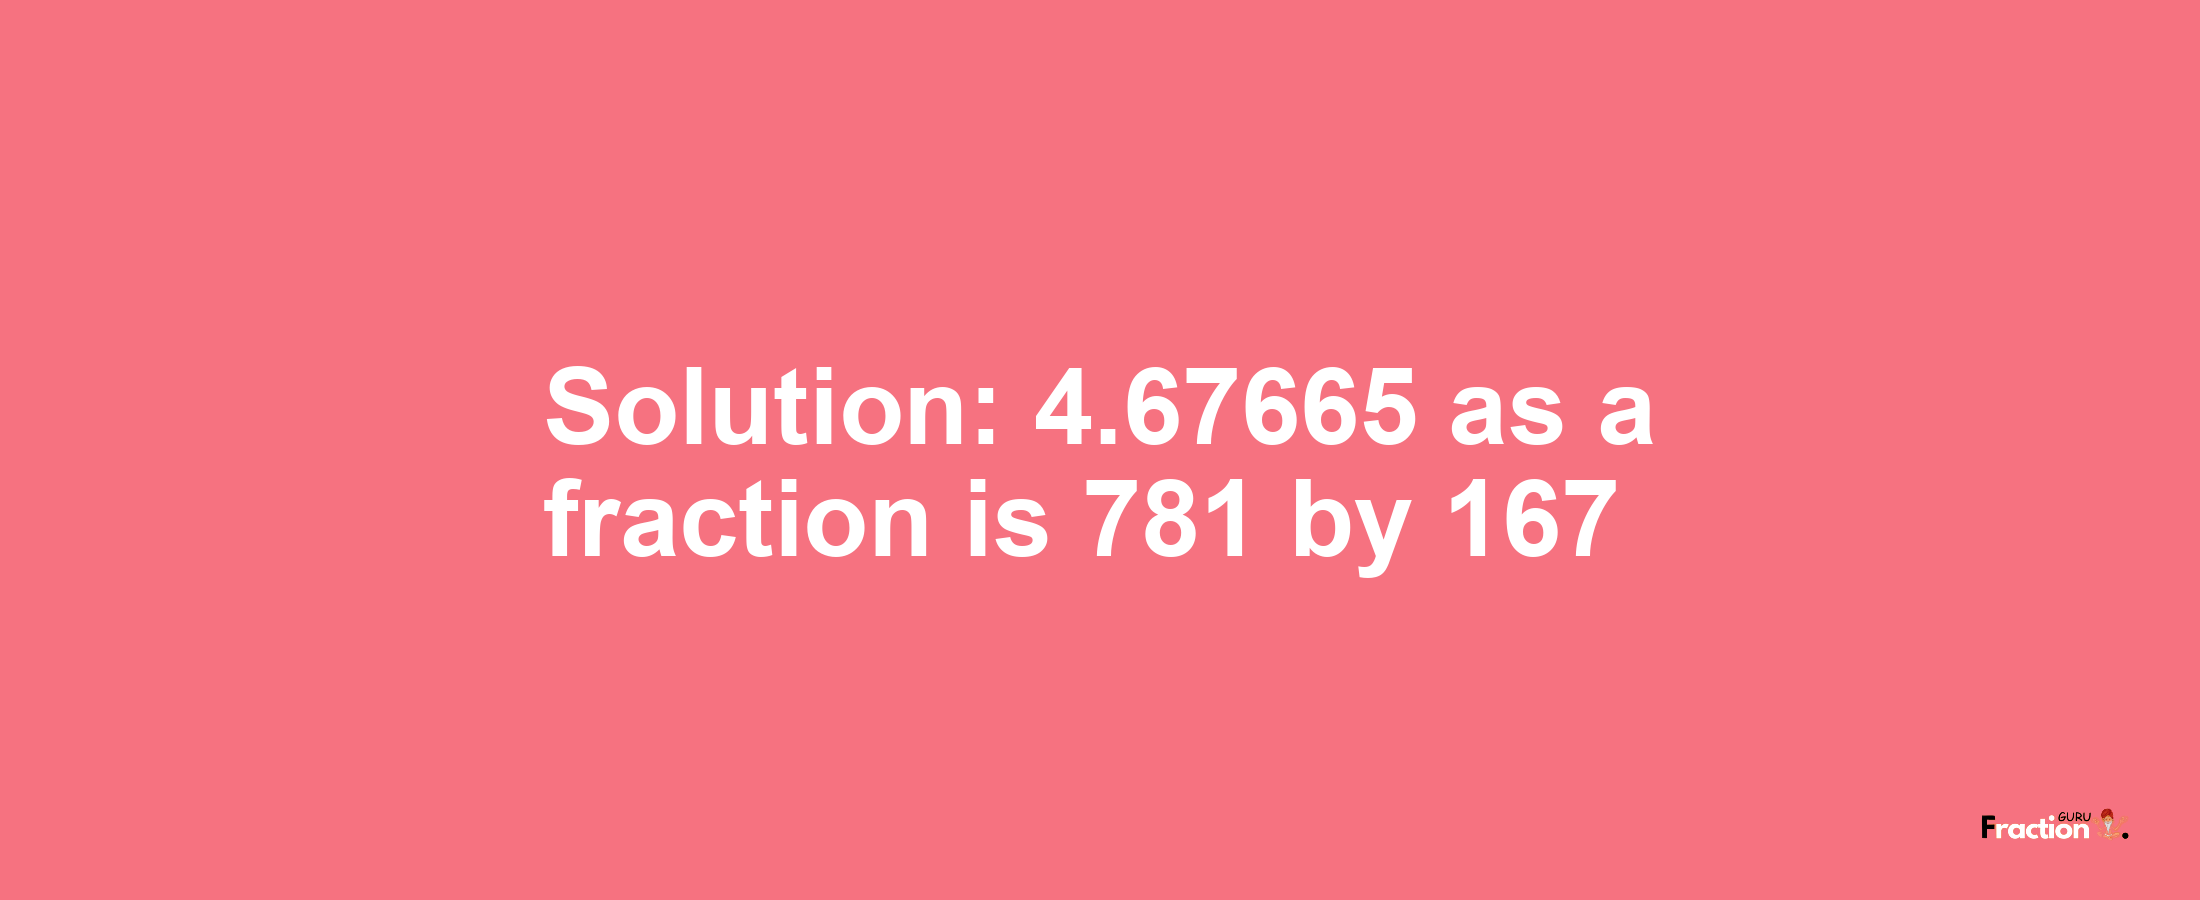 Solution:4.67665 as a fraction is 781/167